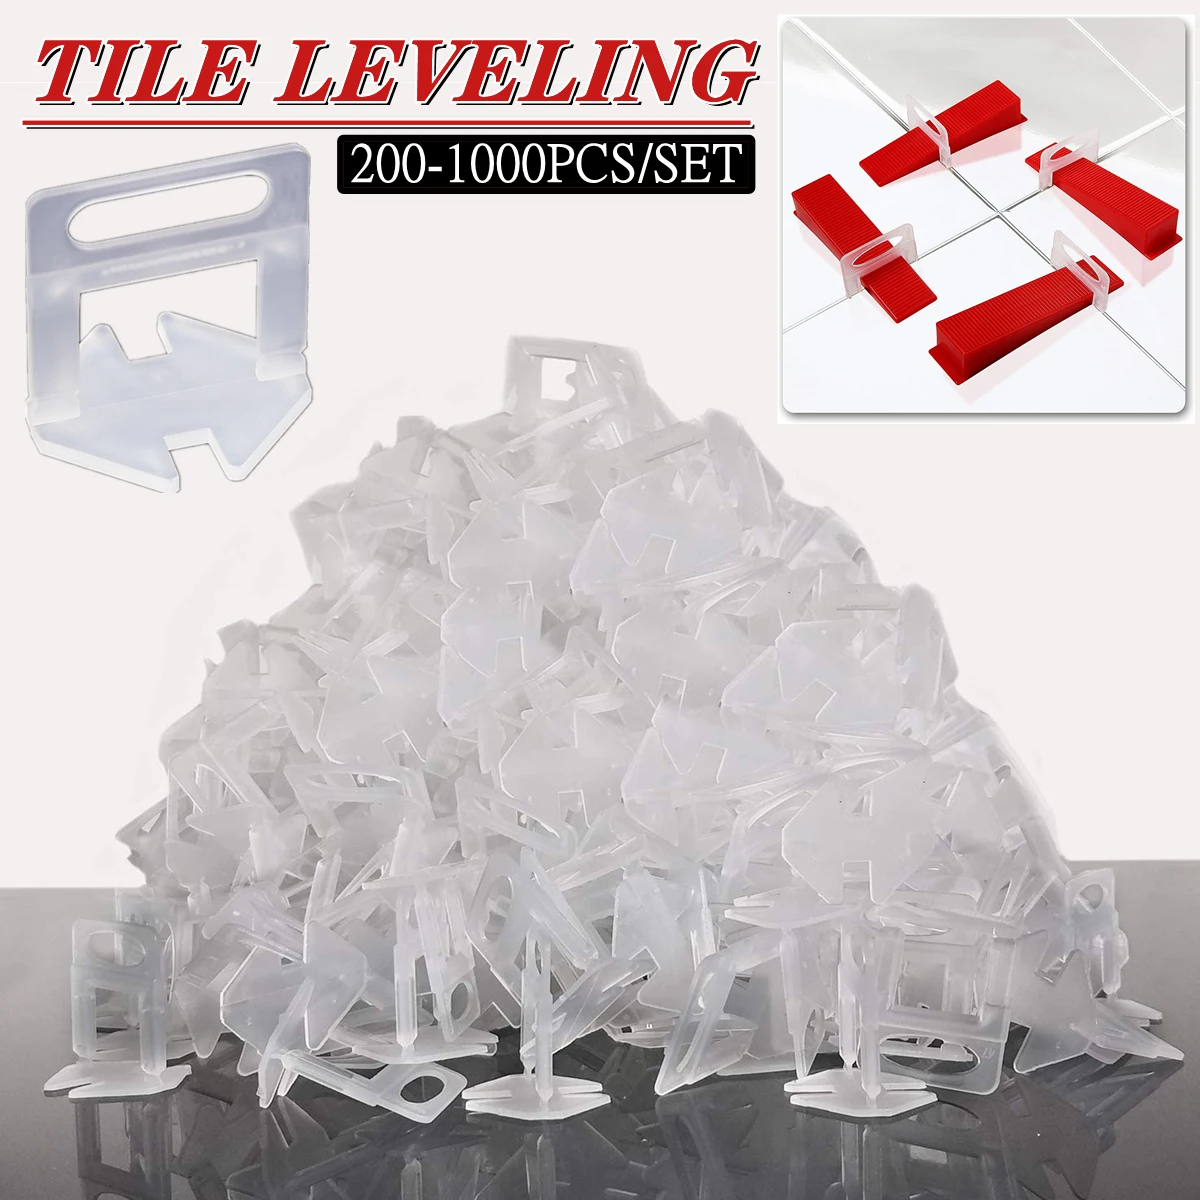 Tile Leveling System Clips 200-1000Pcs Tiles Leveler Spacers 1/1.5/2/2.5/3MM for Ceramic Tile Laying Leveling Construction Tools